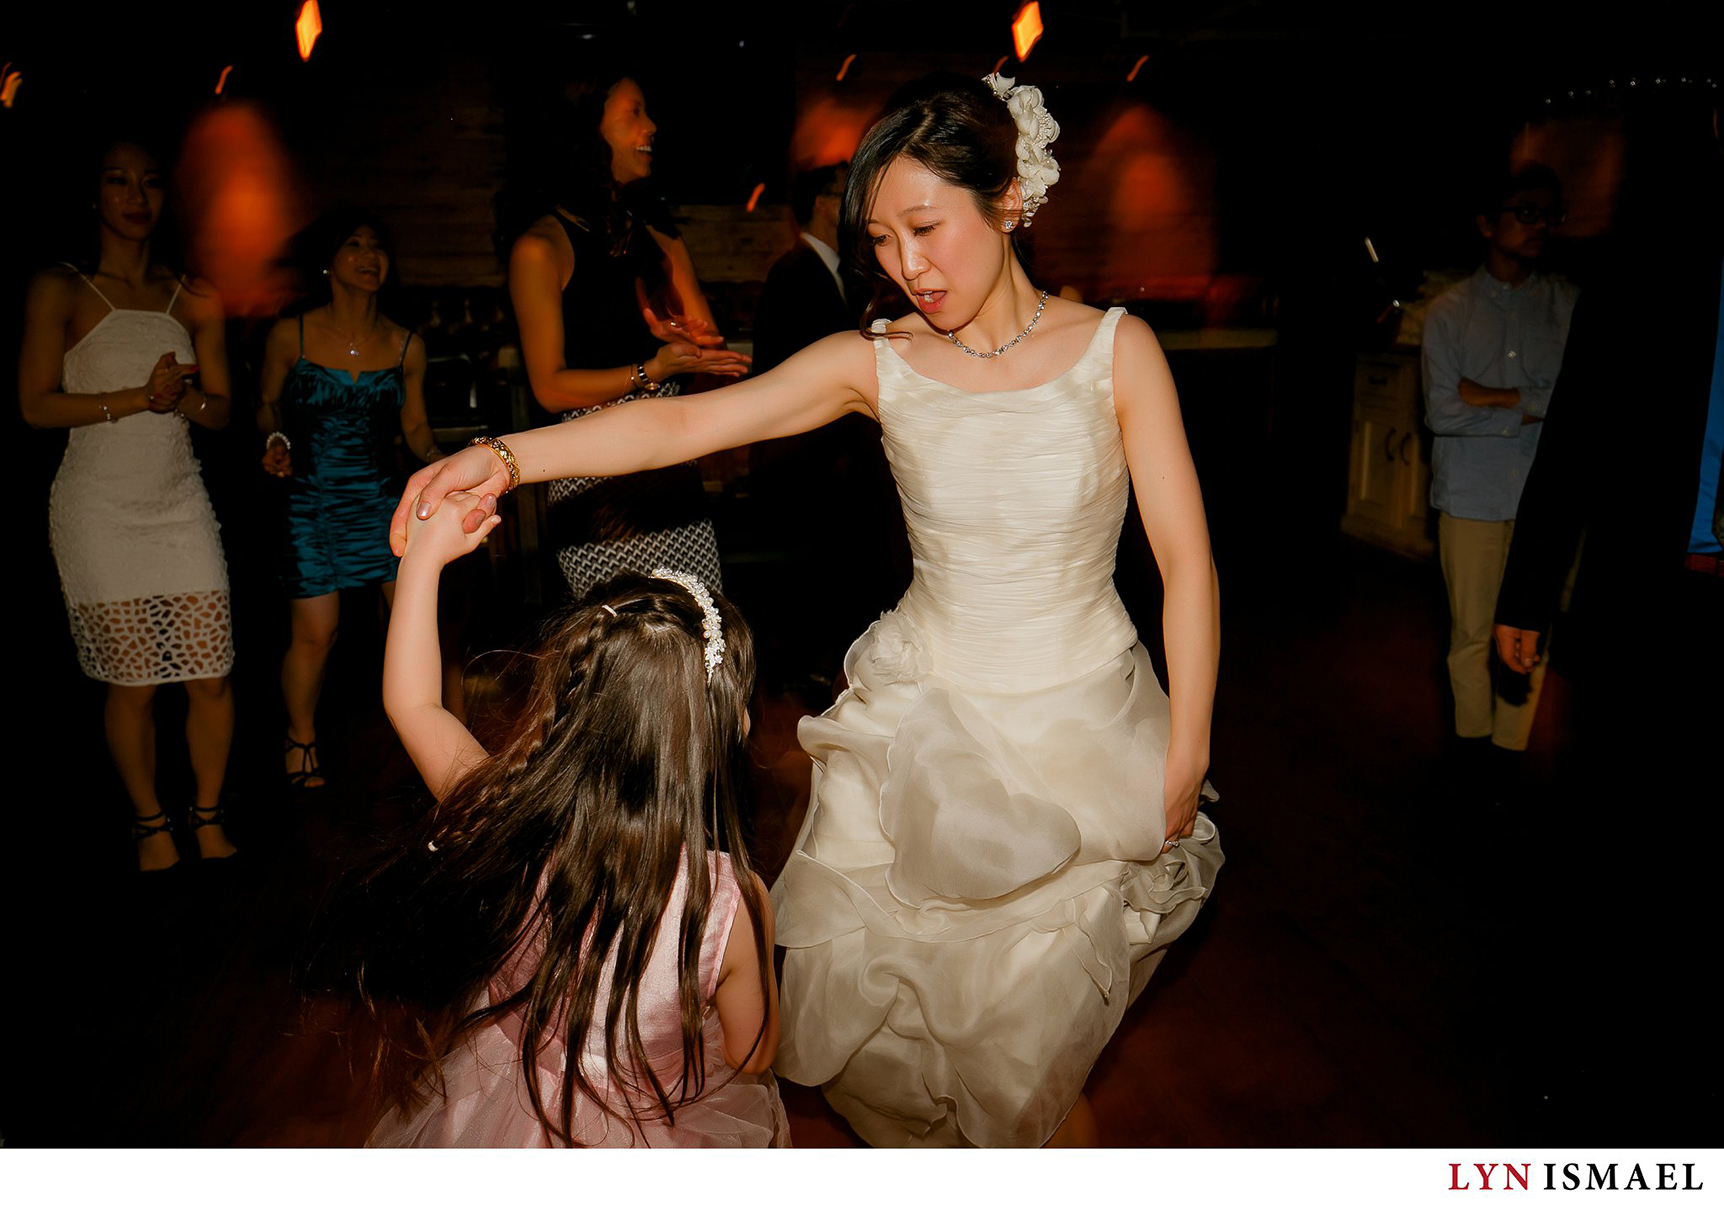 Bride dancing with a little girl at Reds Wine Tavern in Toronto, Ontario.